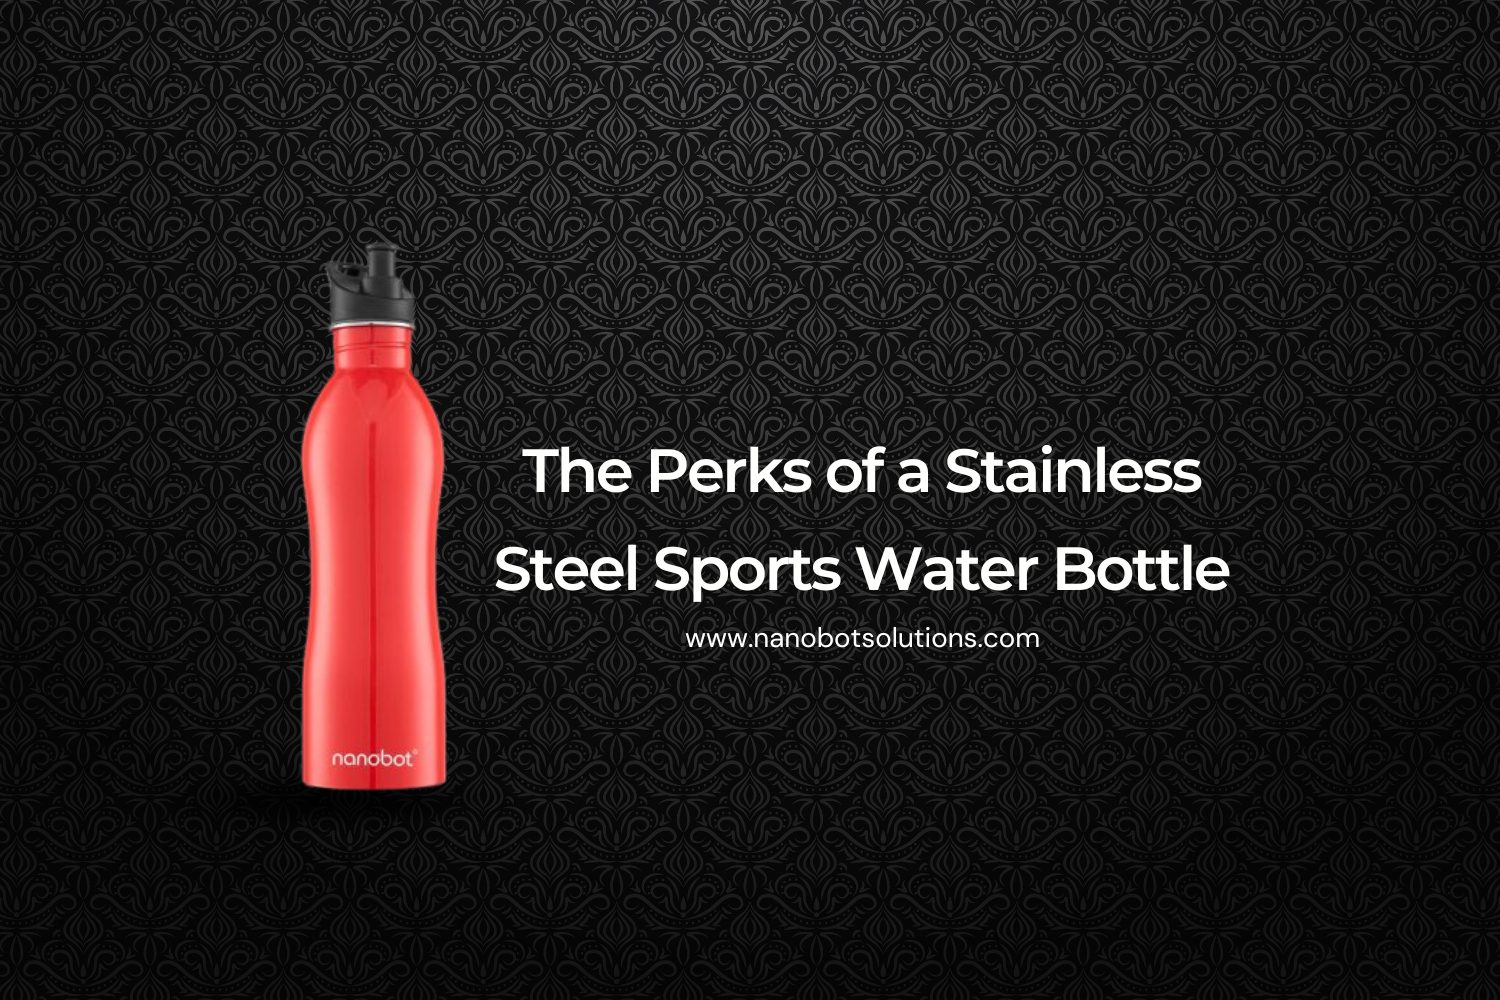 The Perks of a Stainless Steel Sports Water Bottle compressed | Nanobot